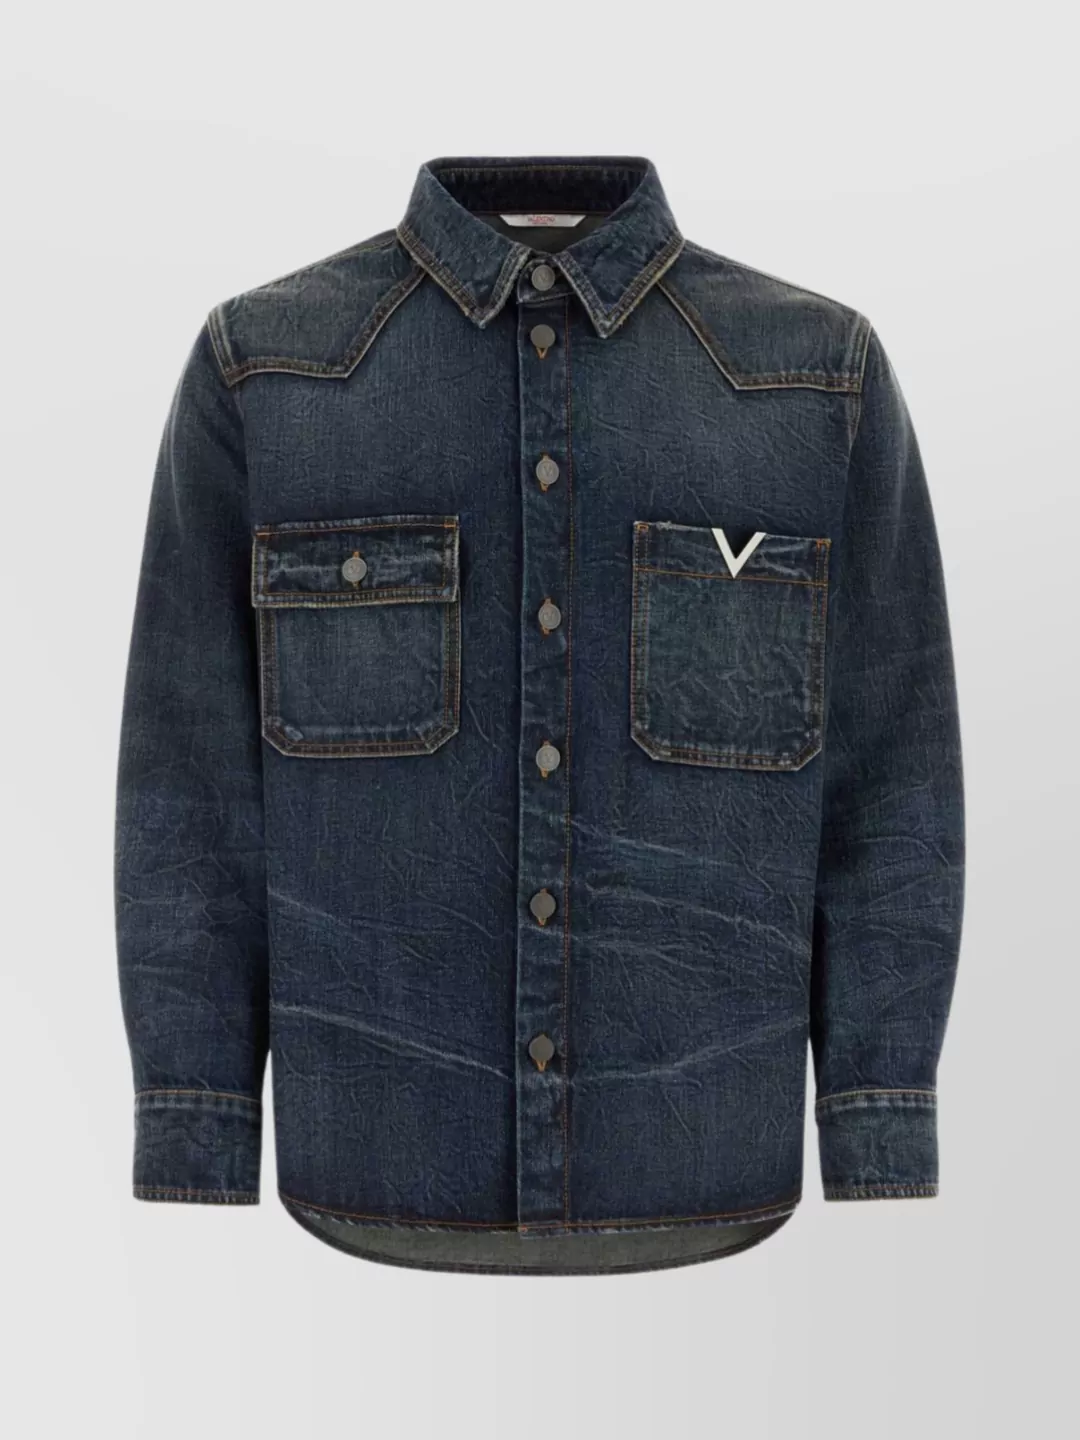 Shop Valentino Denim Shirt With Chest Pockets And Visible Stitching